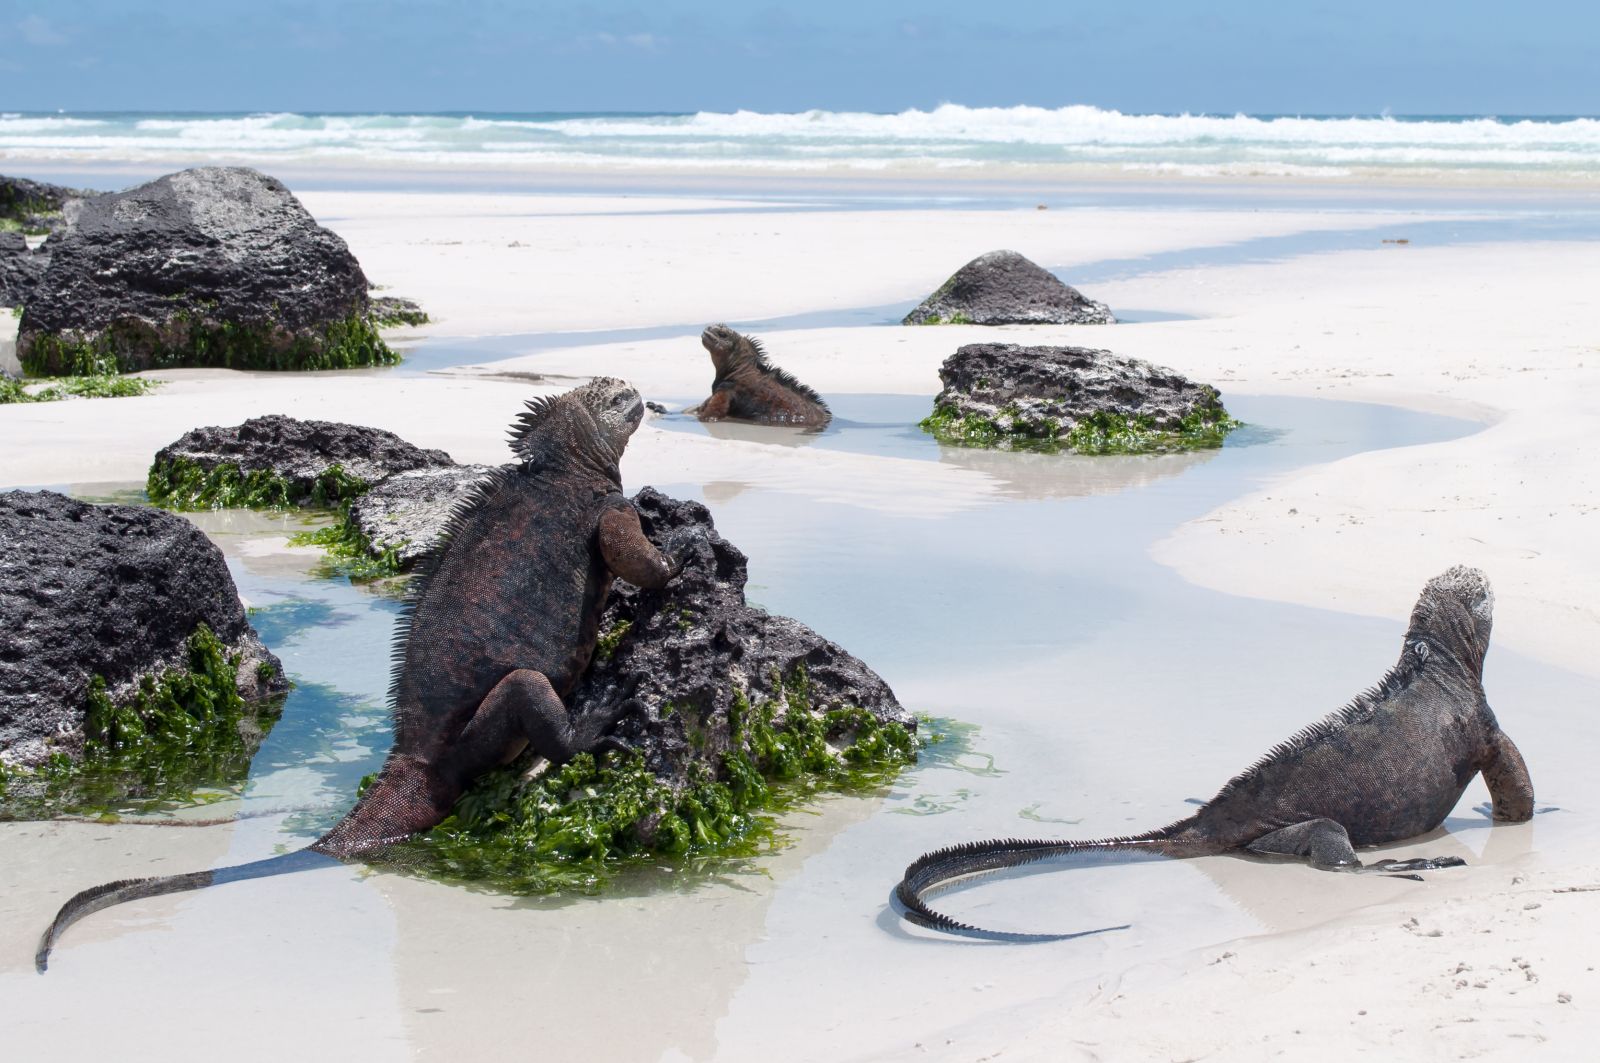 Marine iguanas preparing to swim from a white sand beach in the Galapagos Islands